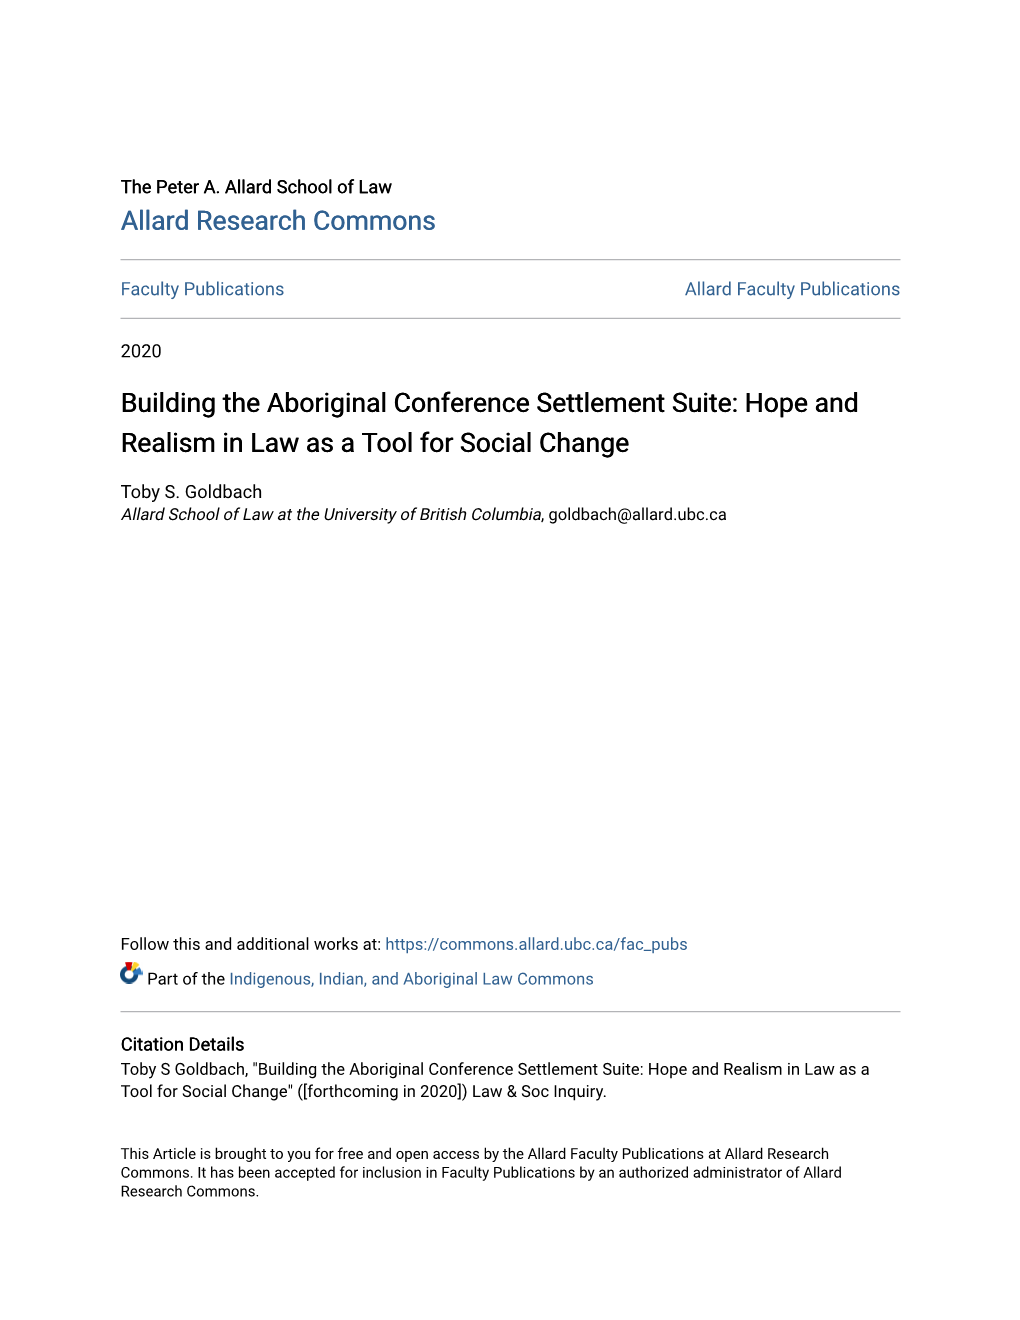 Building the Aboriginal Conference Settlement Suite: Hope and Realism in Law As a Tool for Social Change